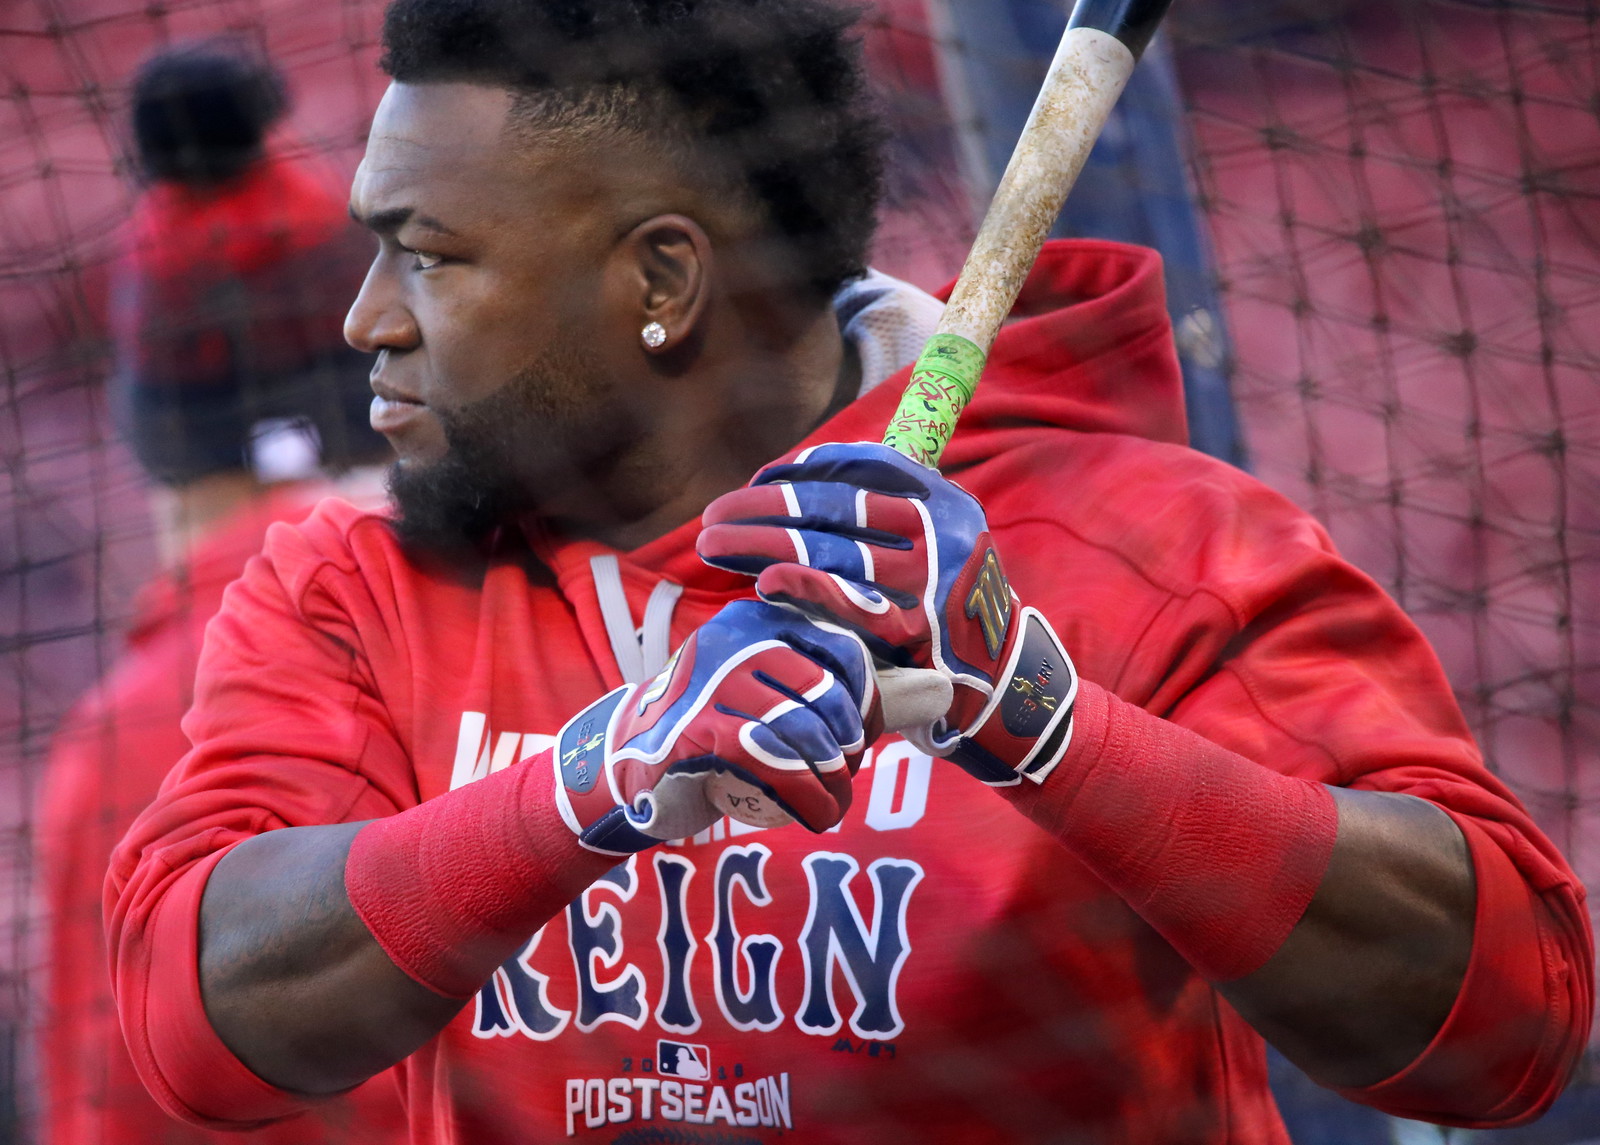 when-former-red-sox-player-david-ortiz-blasted-those-who-claimed-he-used-steroids